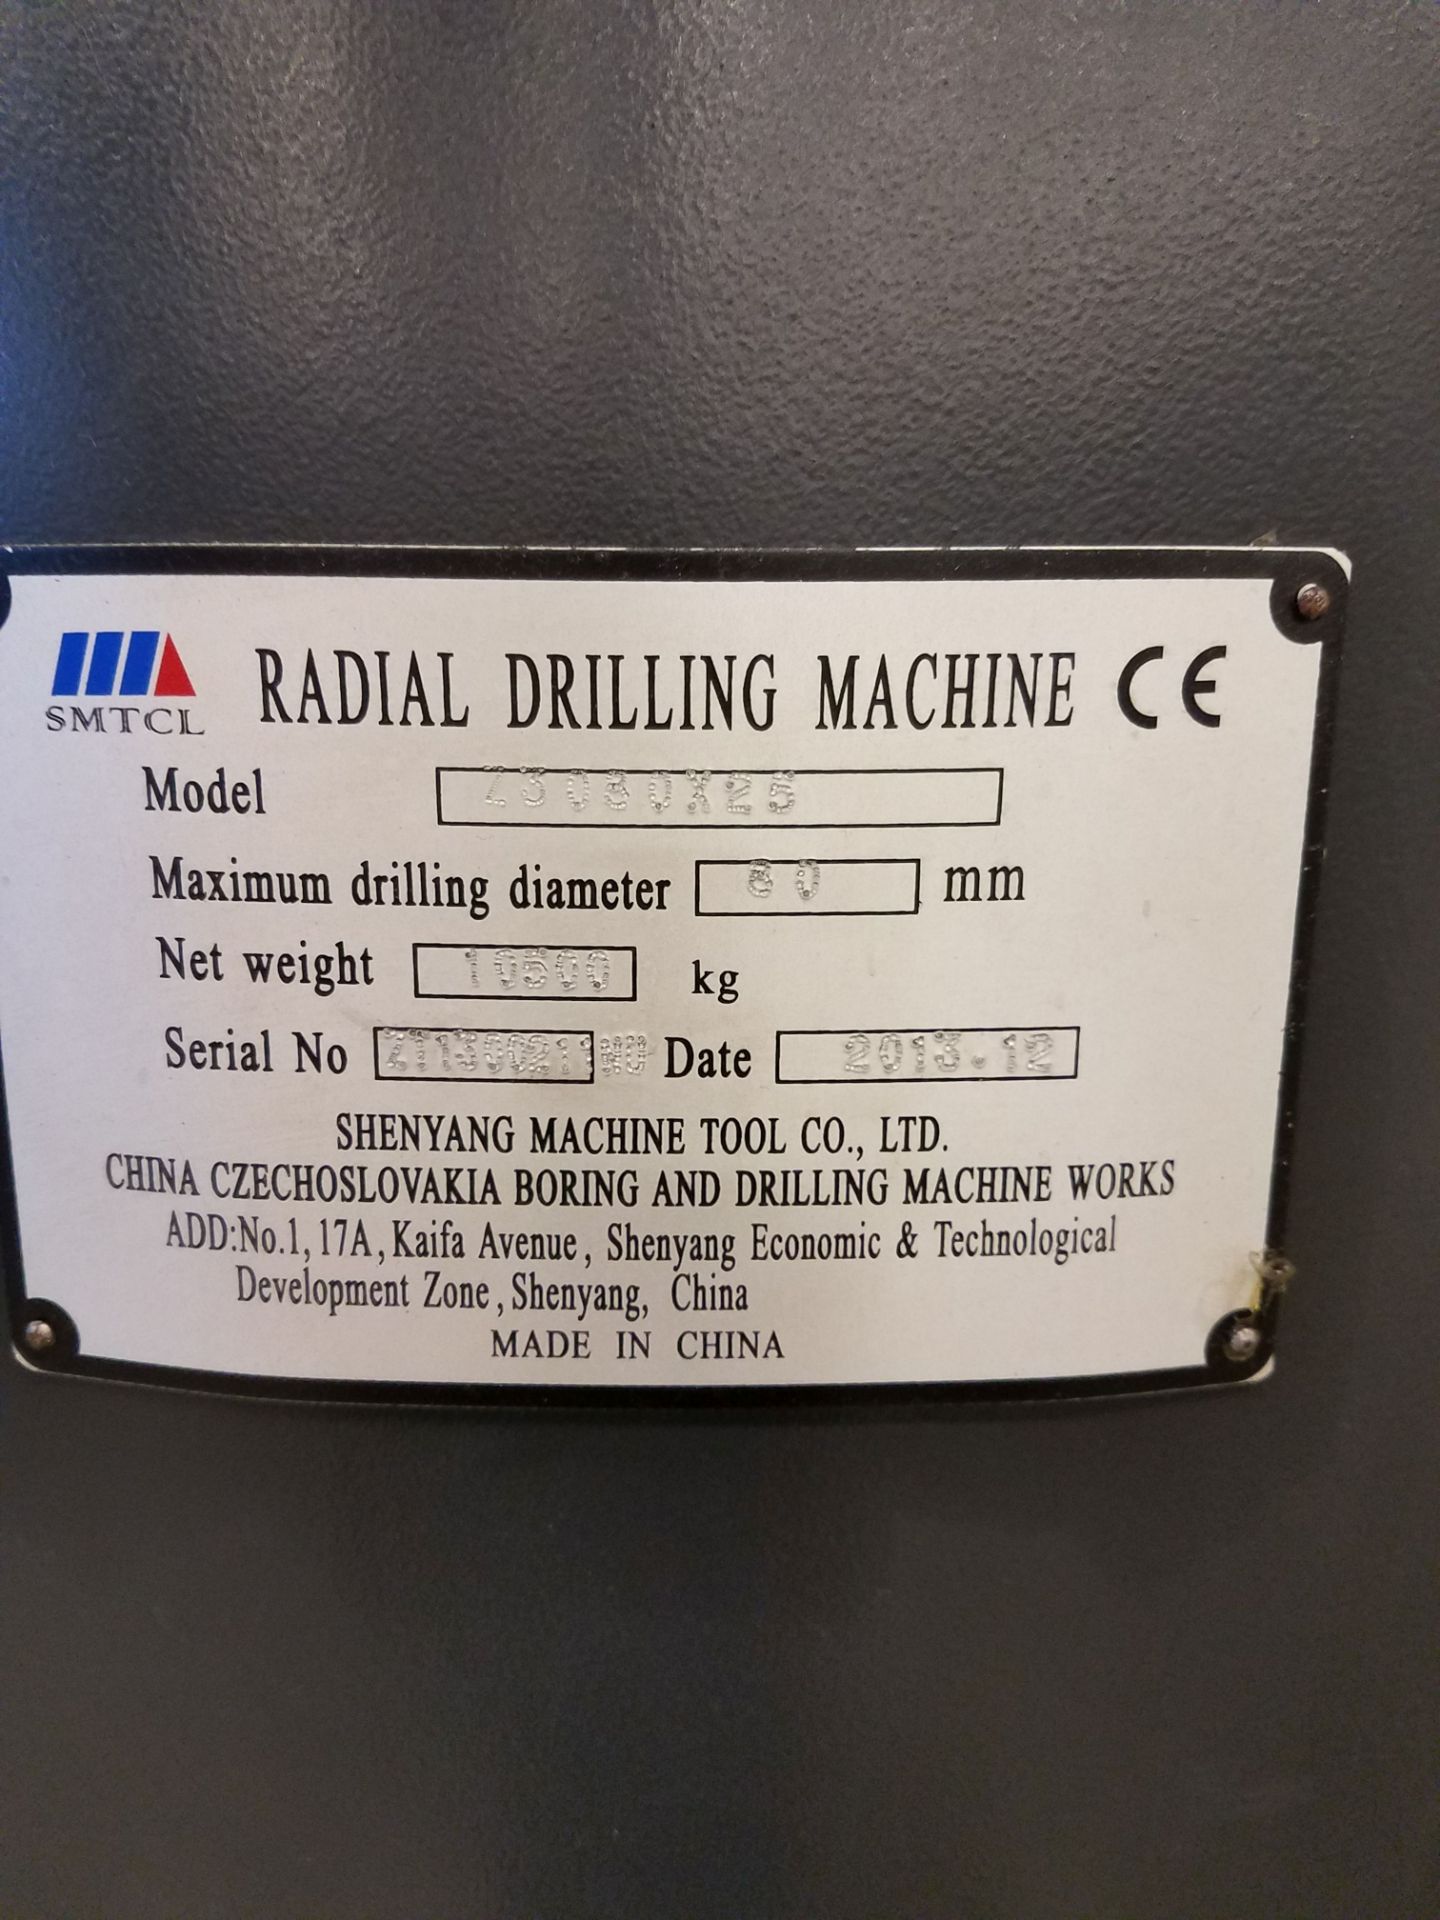 8' ARM SMTCL MODEL Z3080X25 RADIAL ARM DRILLS; S/N ZT1300211NU (NEW 2013) 80MM DRILLING DIA., 16- - Image 3 of 5